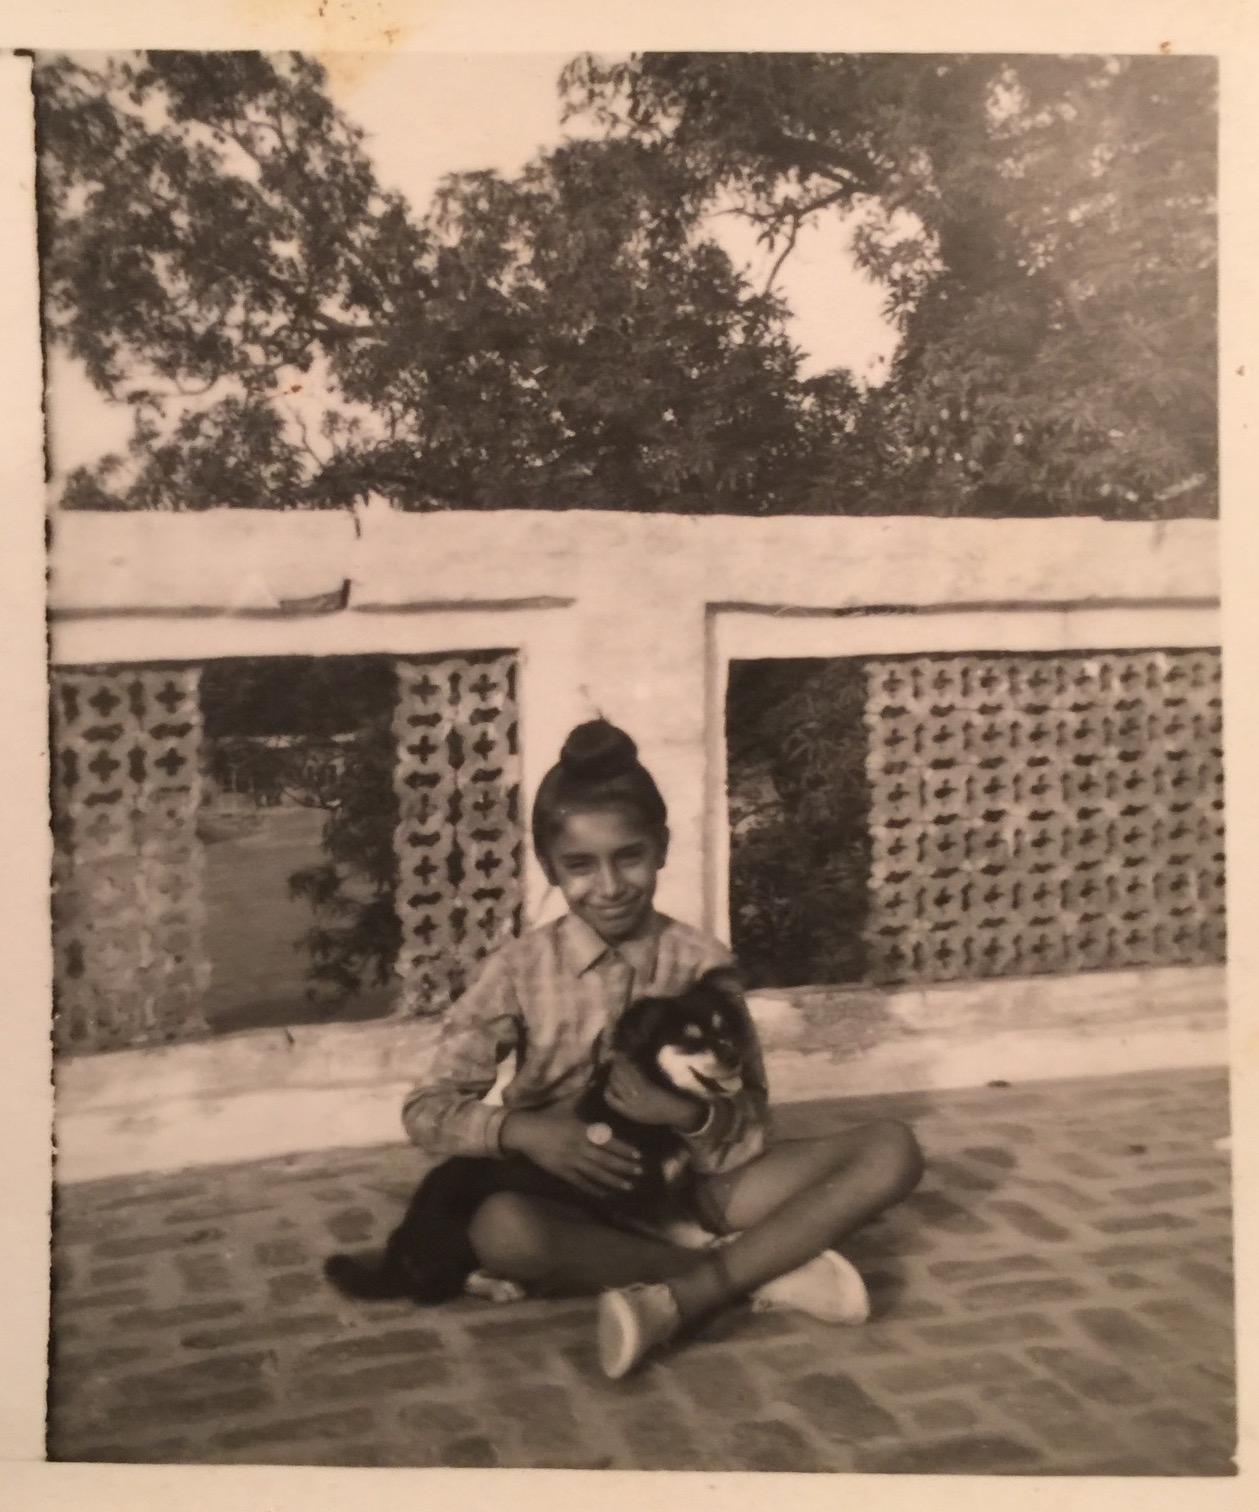 Jasbir Singh Kang with His Dog, Lucy Black. Patiala, Punjab, c Early 1970s. Courtesy of the Kang Family.